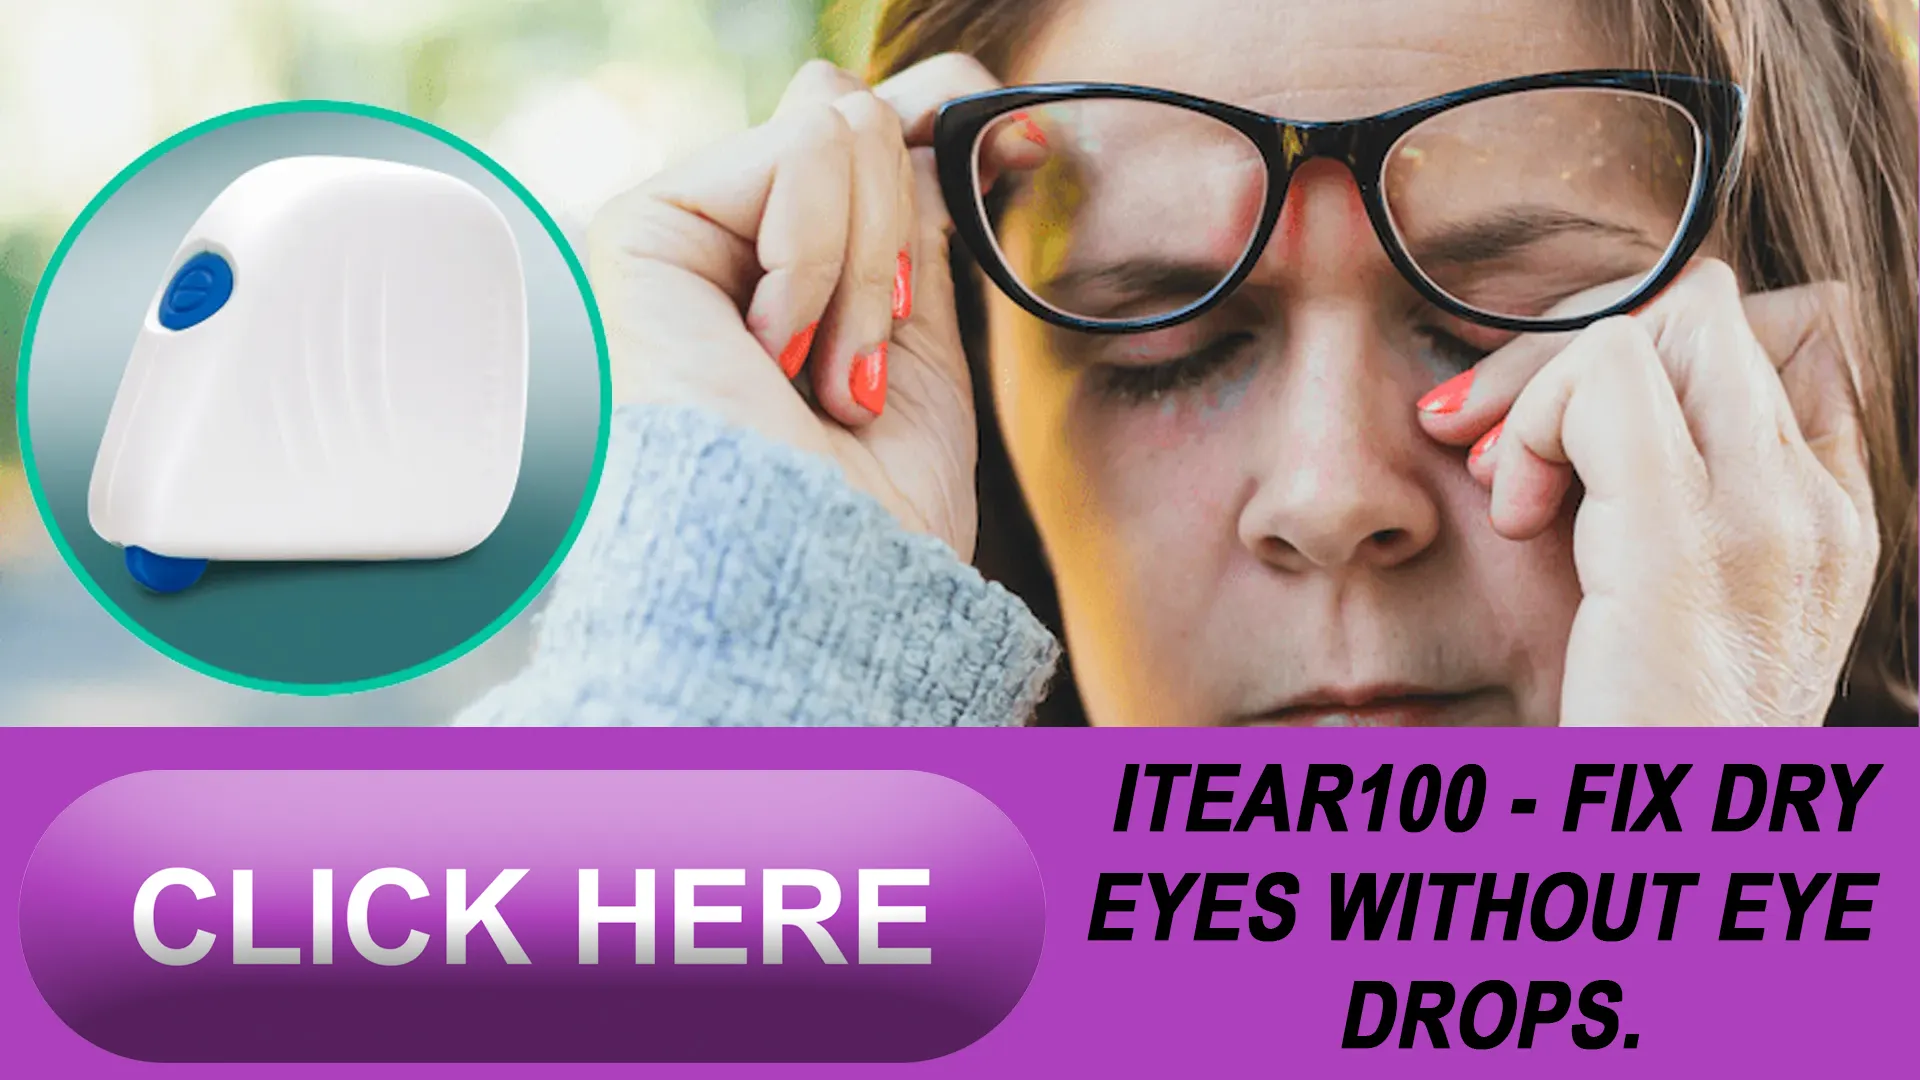 Experience Relief with the iTEAR100 Device